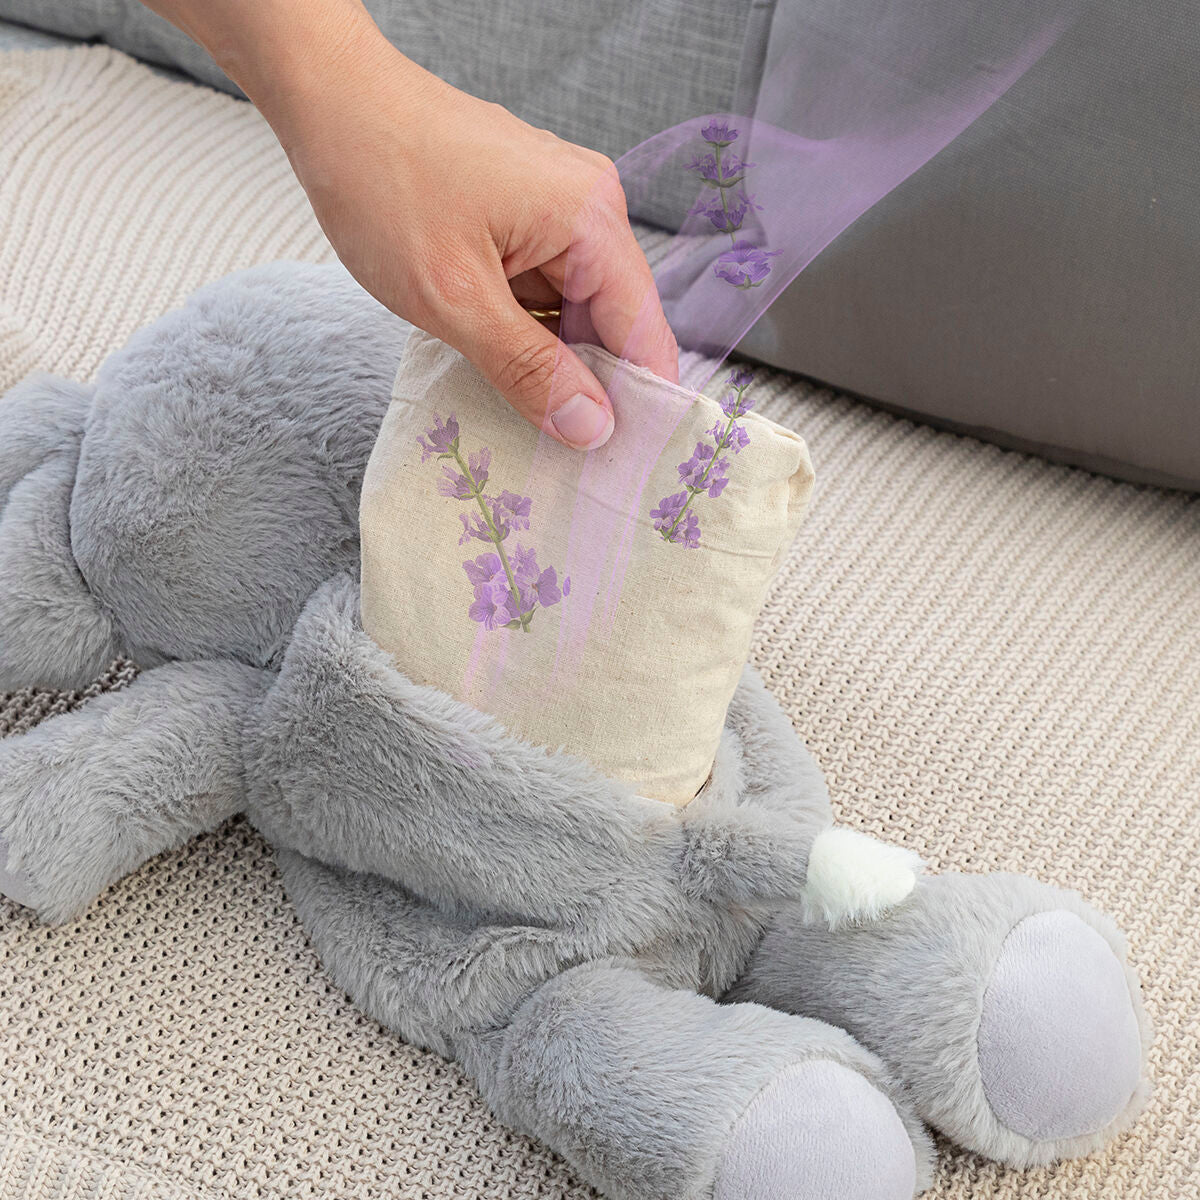 Elephant soft toy with Warming and Cooling Effect Phantie InnovaGoods (Refurbished A+)